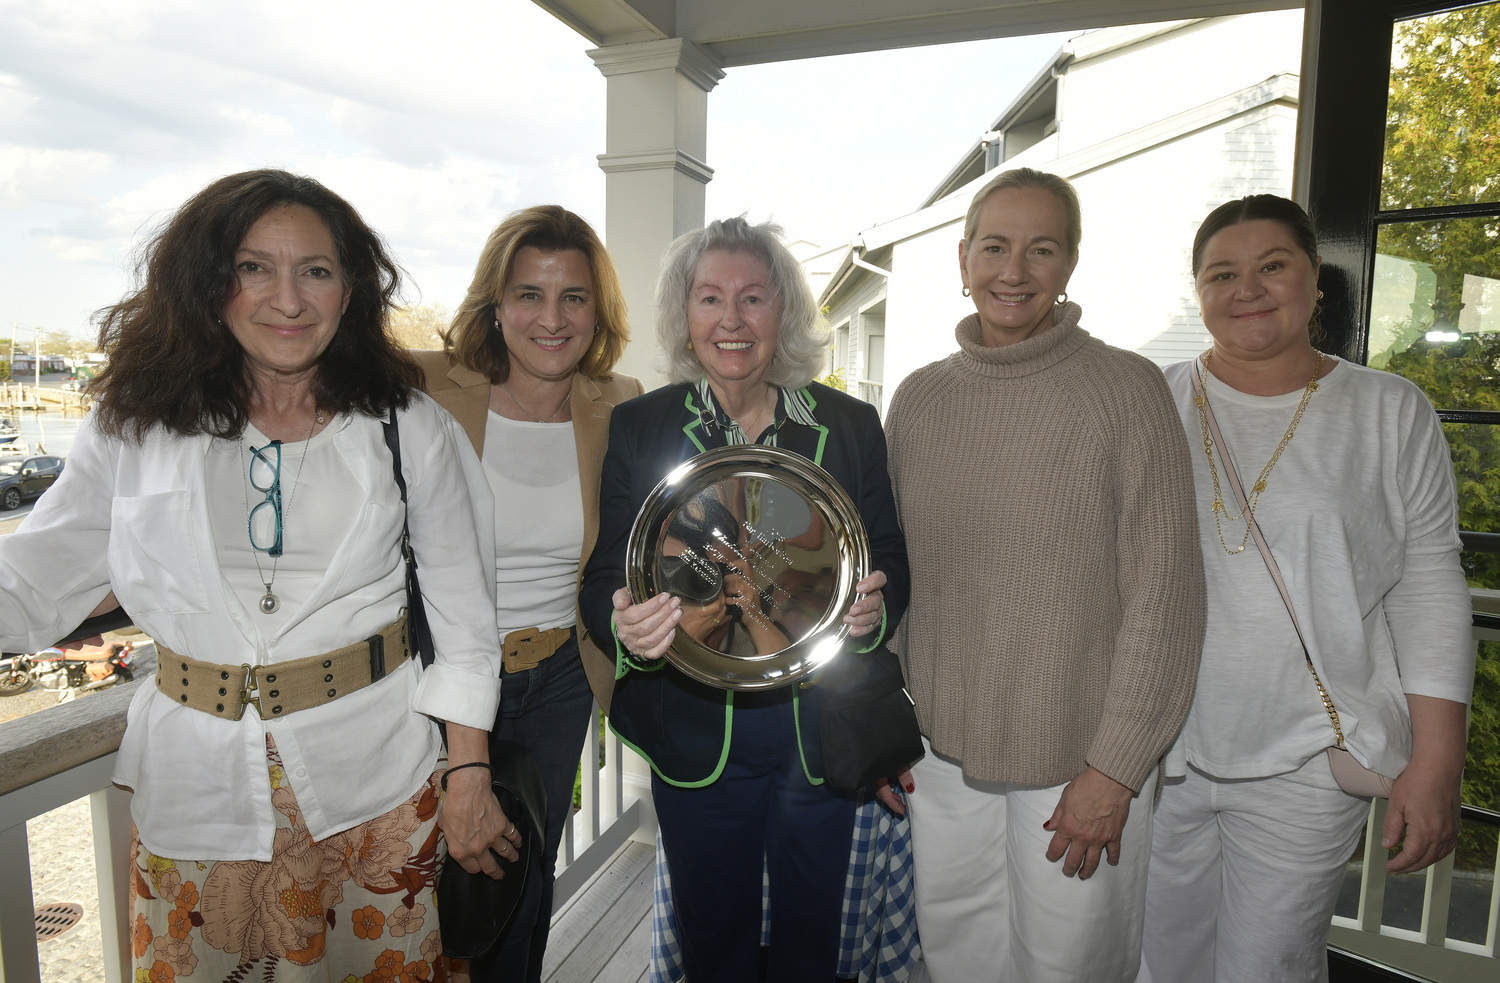 The Brown Harris Stevens 2018 Women's Whaleboat champions, from left, Cynthia  Barrett, Kim Kakerbeck. Jane Holden, Jane Babcock and Clare Tenkarian with their award at the Save the Whale Boats Fundraiser at Baron's Cove in Sag Harbor on April 2.  DANA SHAW